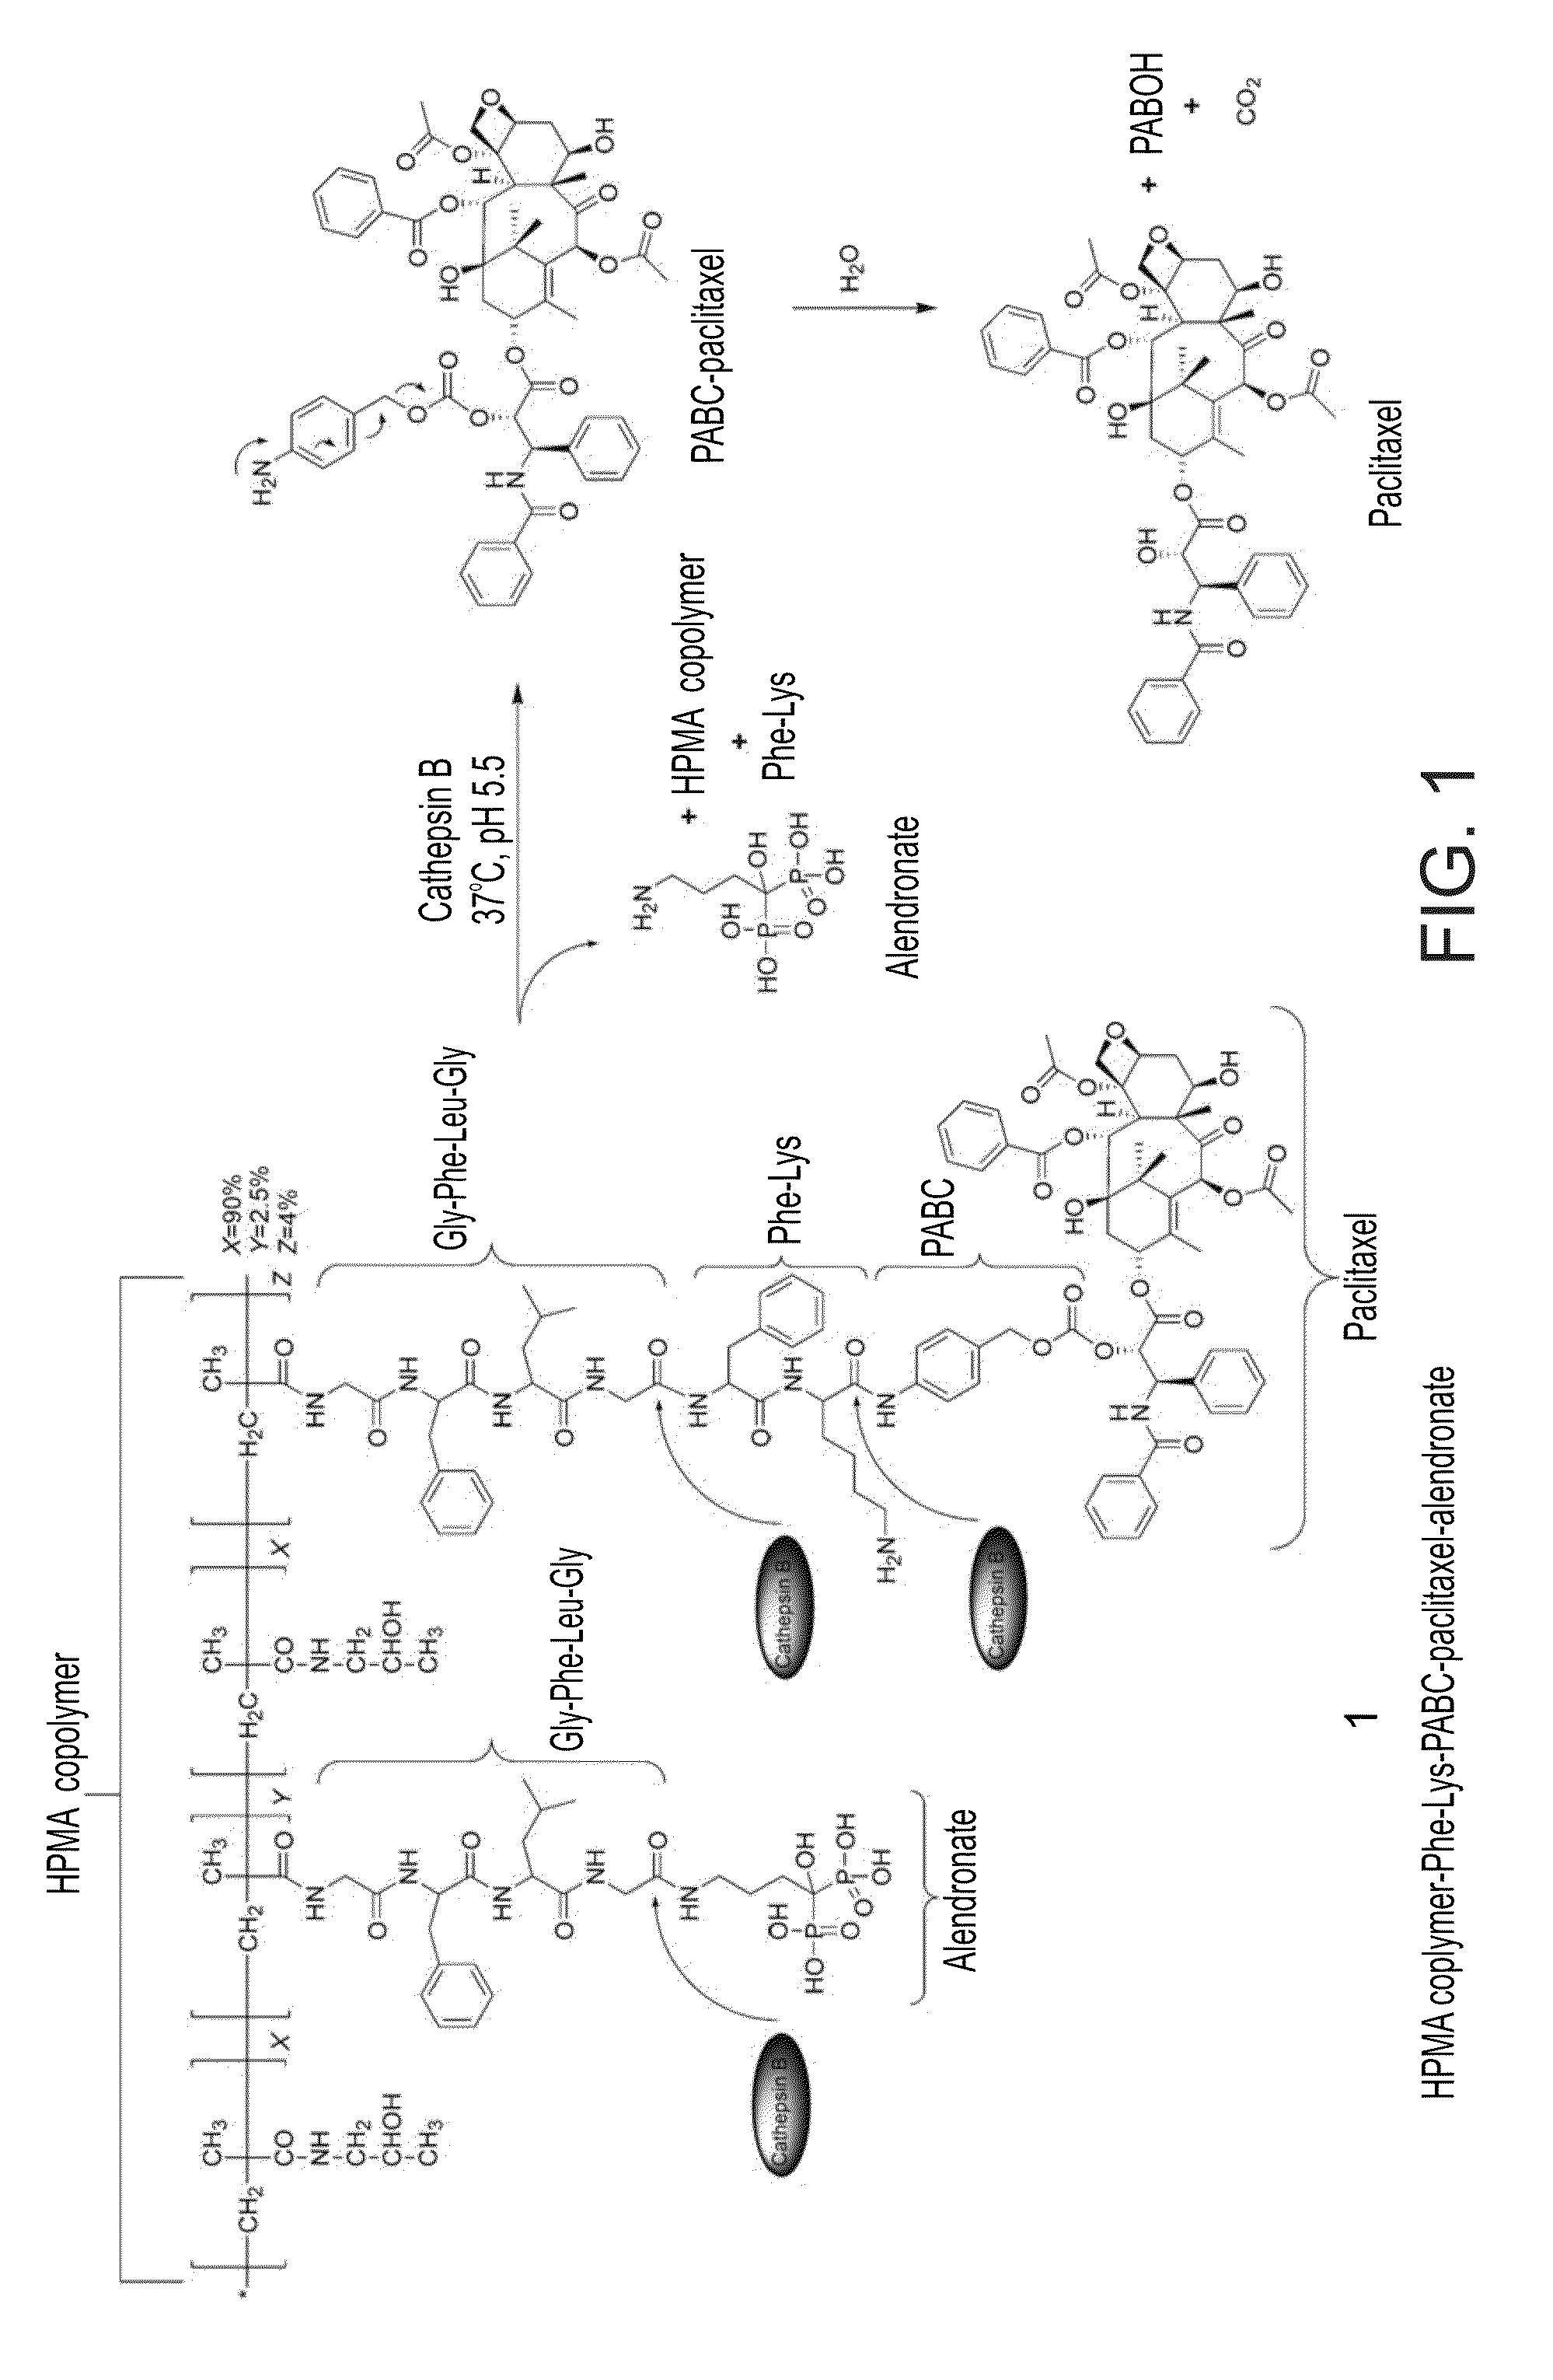 Conjugates of a polymer, a bisphosphonate and an Anti-angiogenesis agent and uses thereof in the treatment and monitoring of bone related diseases